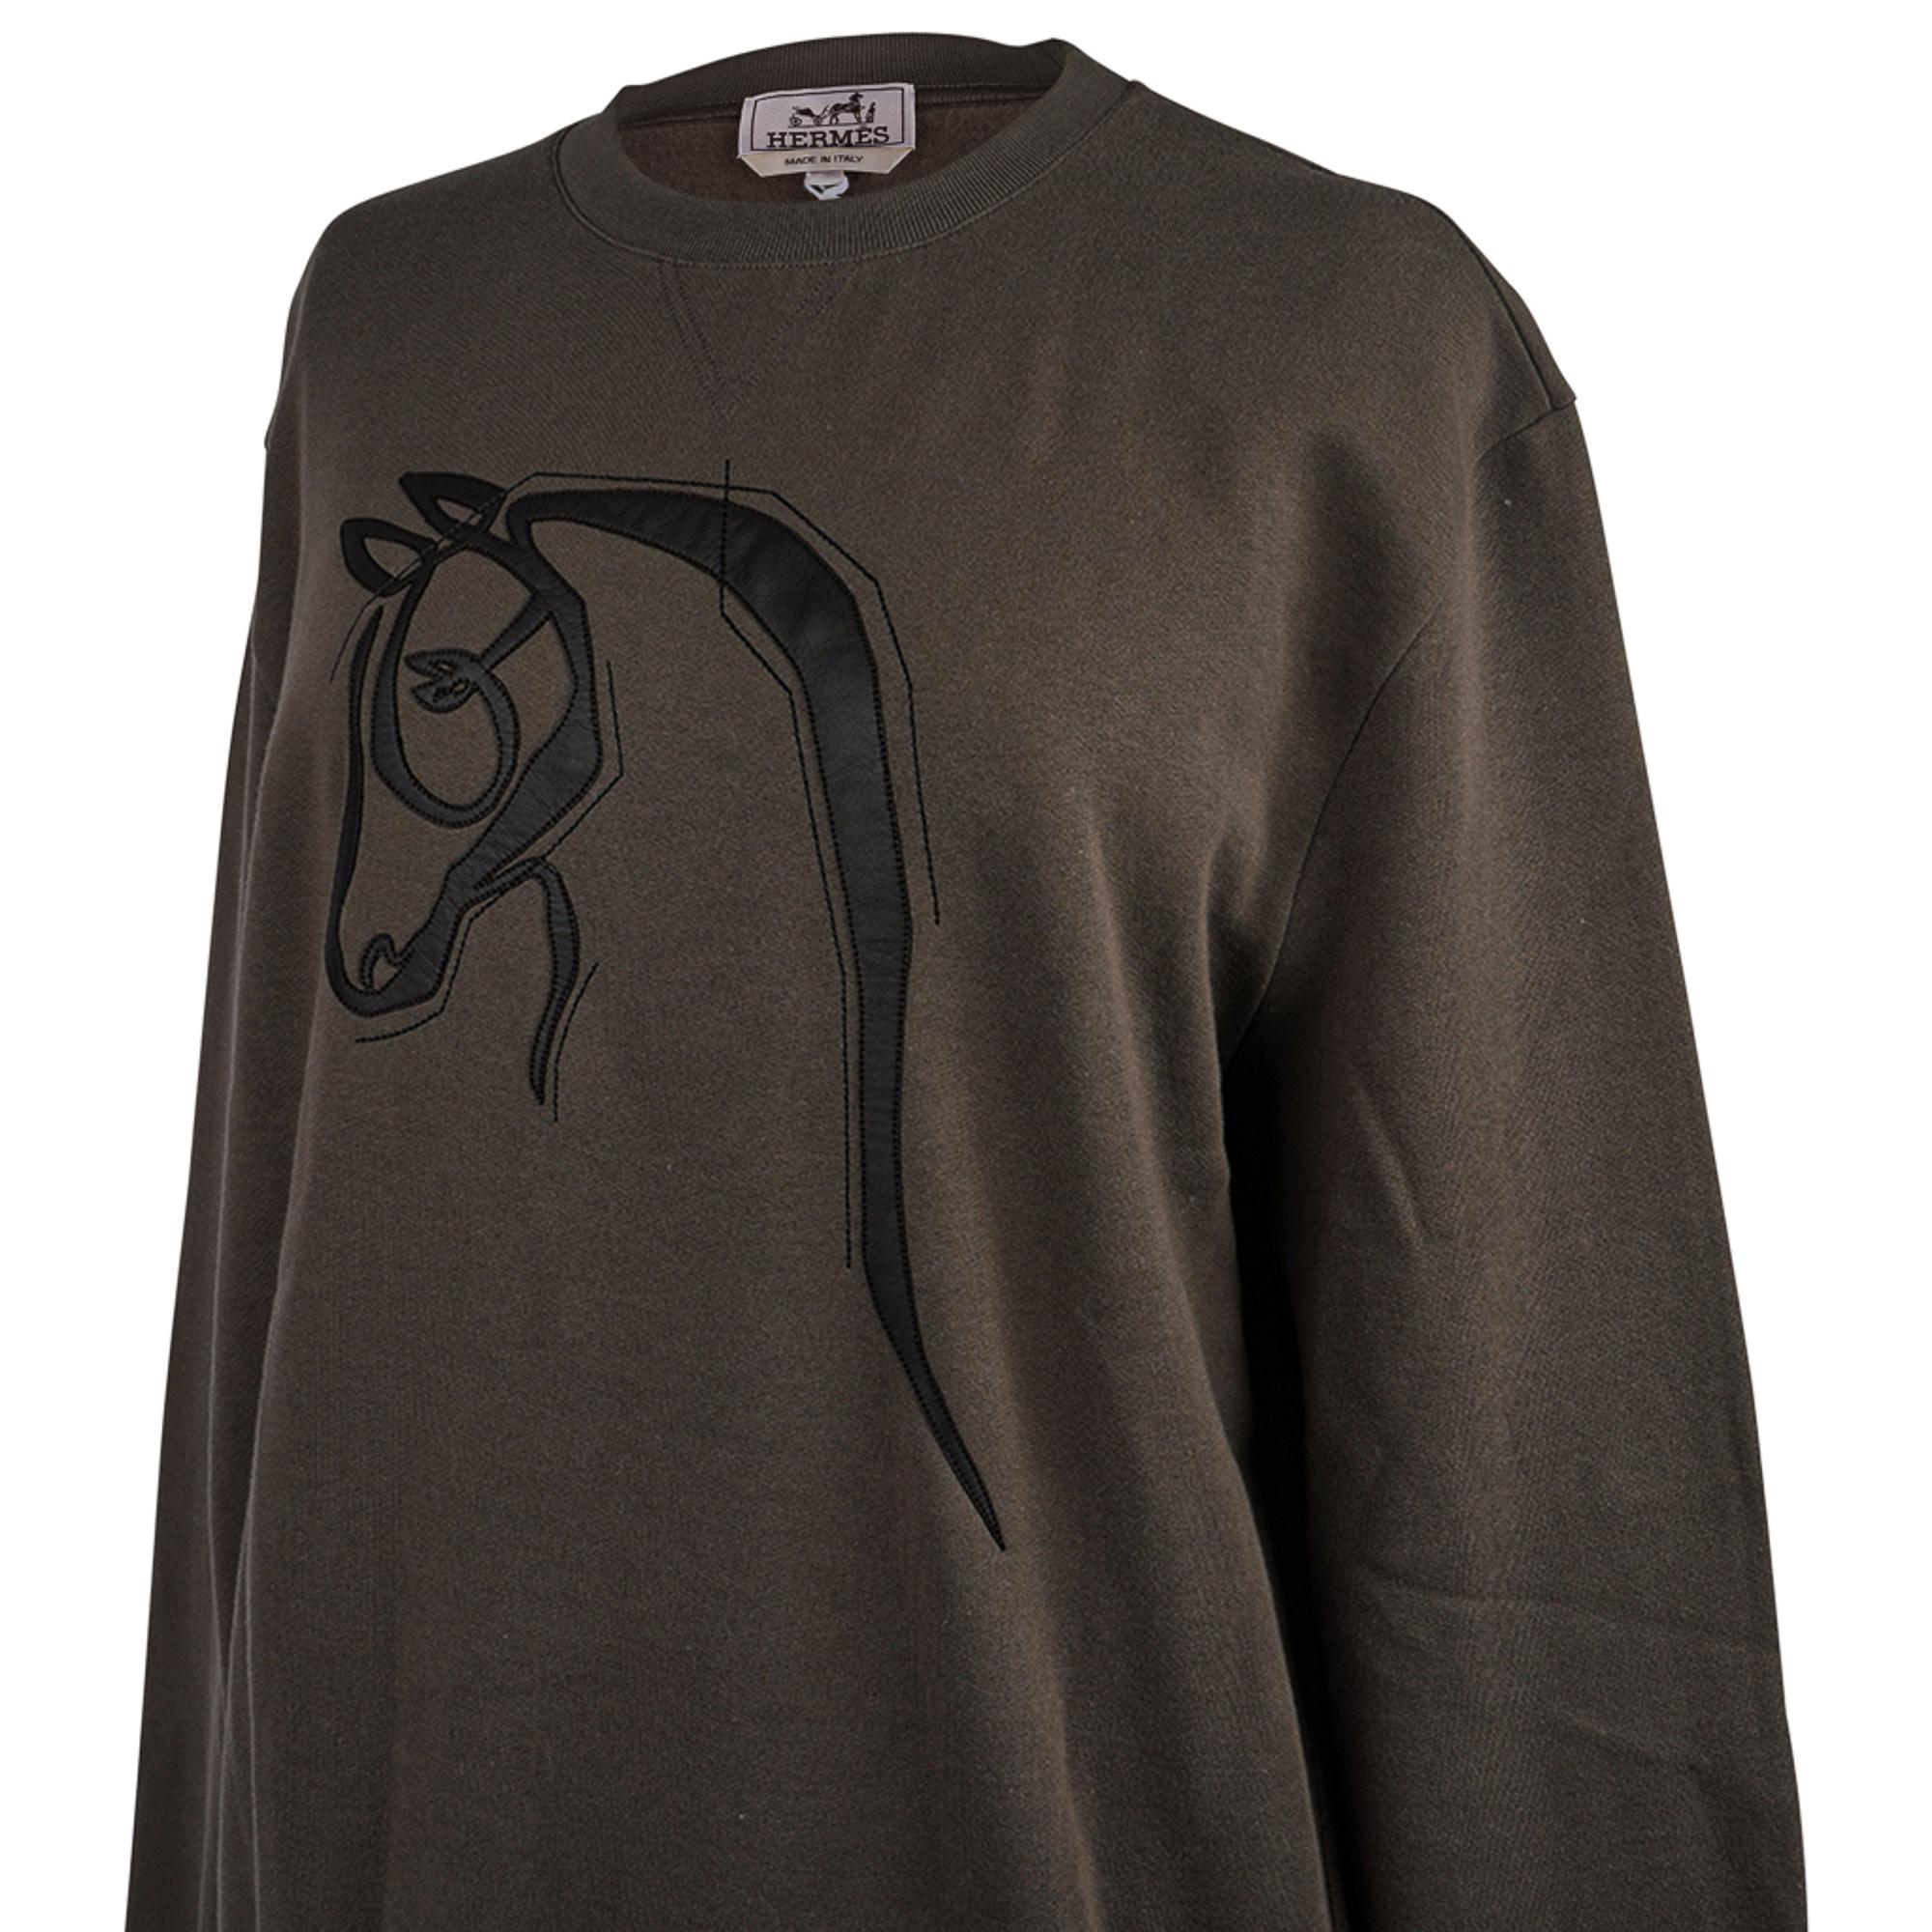 Mightychic offers an Hermes Crewneck Sweater (sweatshirt) with Leather Detail.
Poivre Cotton with Black Cheval au Trait lambskin patch in front.
Ribbed cuffs and hip.
Fabric is cotton.
NEW or NEVER WORN.
final sale

SIZE: L

SWEATER MEASURES:
LENGTH